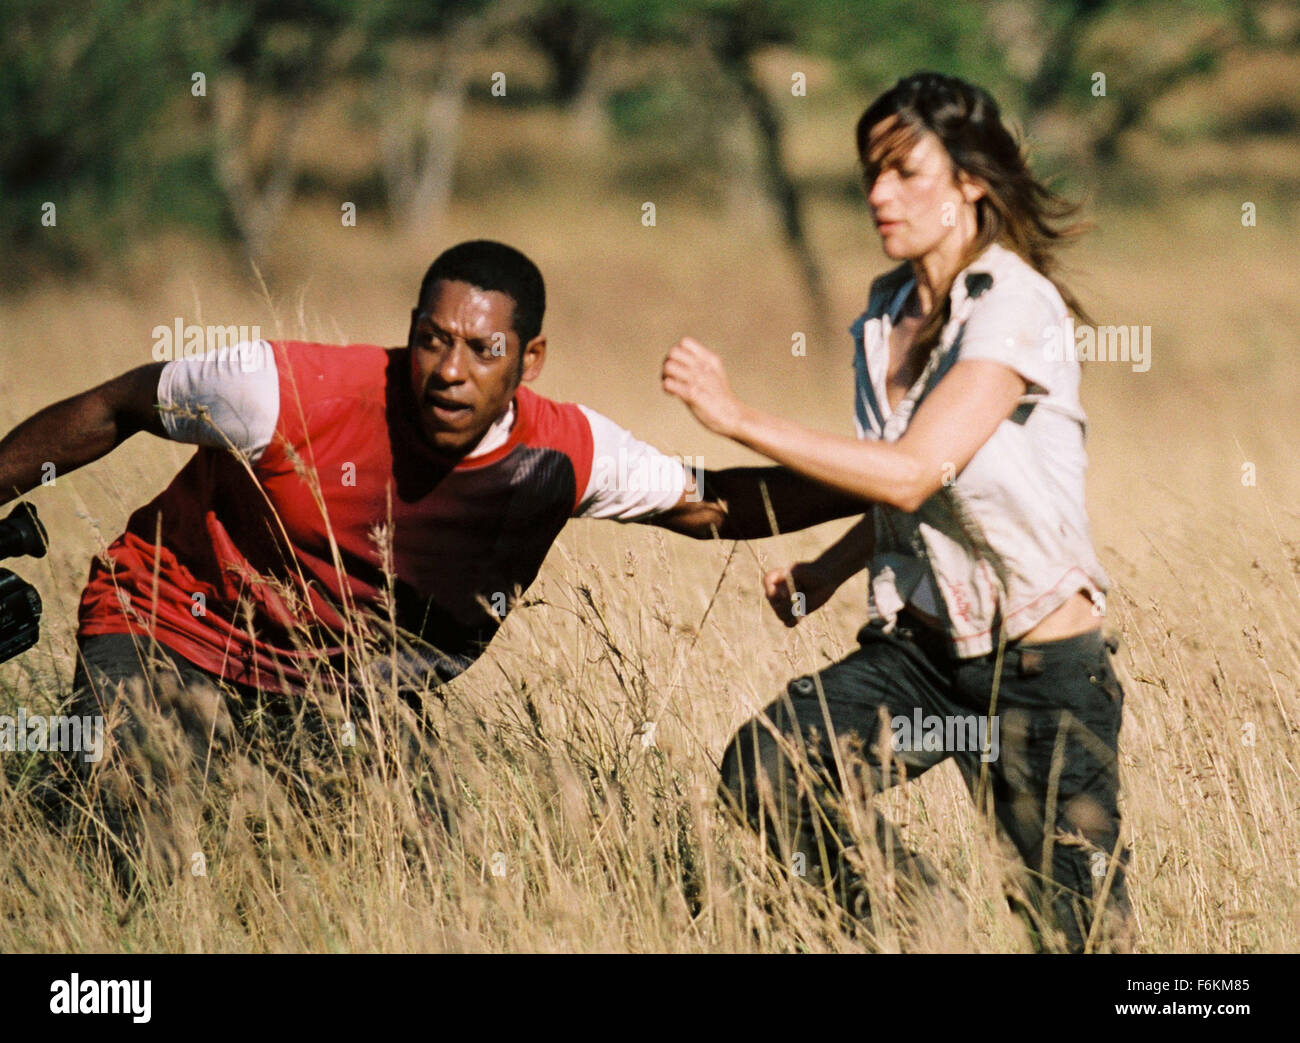 RELEASE DATE: January 12, 2007. MOVIE TITLE: Primeval - STUDIO: Hollywood Pictures. PLOT: A news team is sent to South Africa to capture and bring home a legendary 25-foot crocodile. Their difficult task turns potentially deadly when a warlord targets them for death. PICTURED: ORLANDO JONES as Steven Johnson, and BROOKE LANGTON as Aviva Masters. Stock Photo